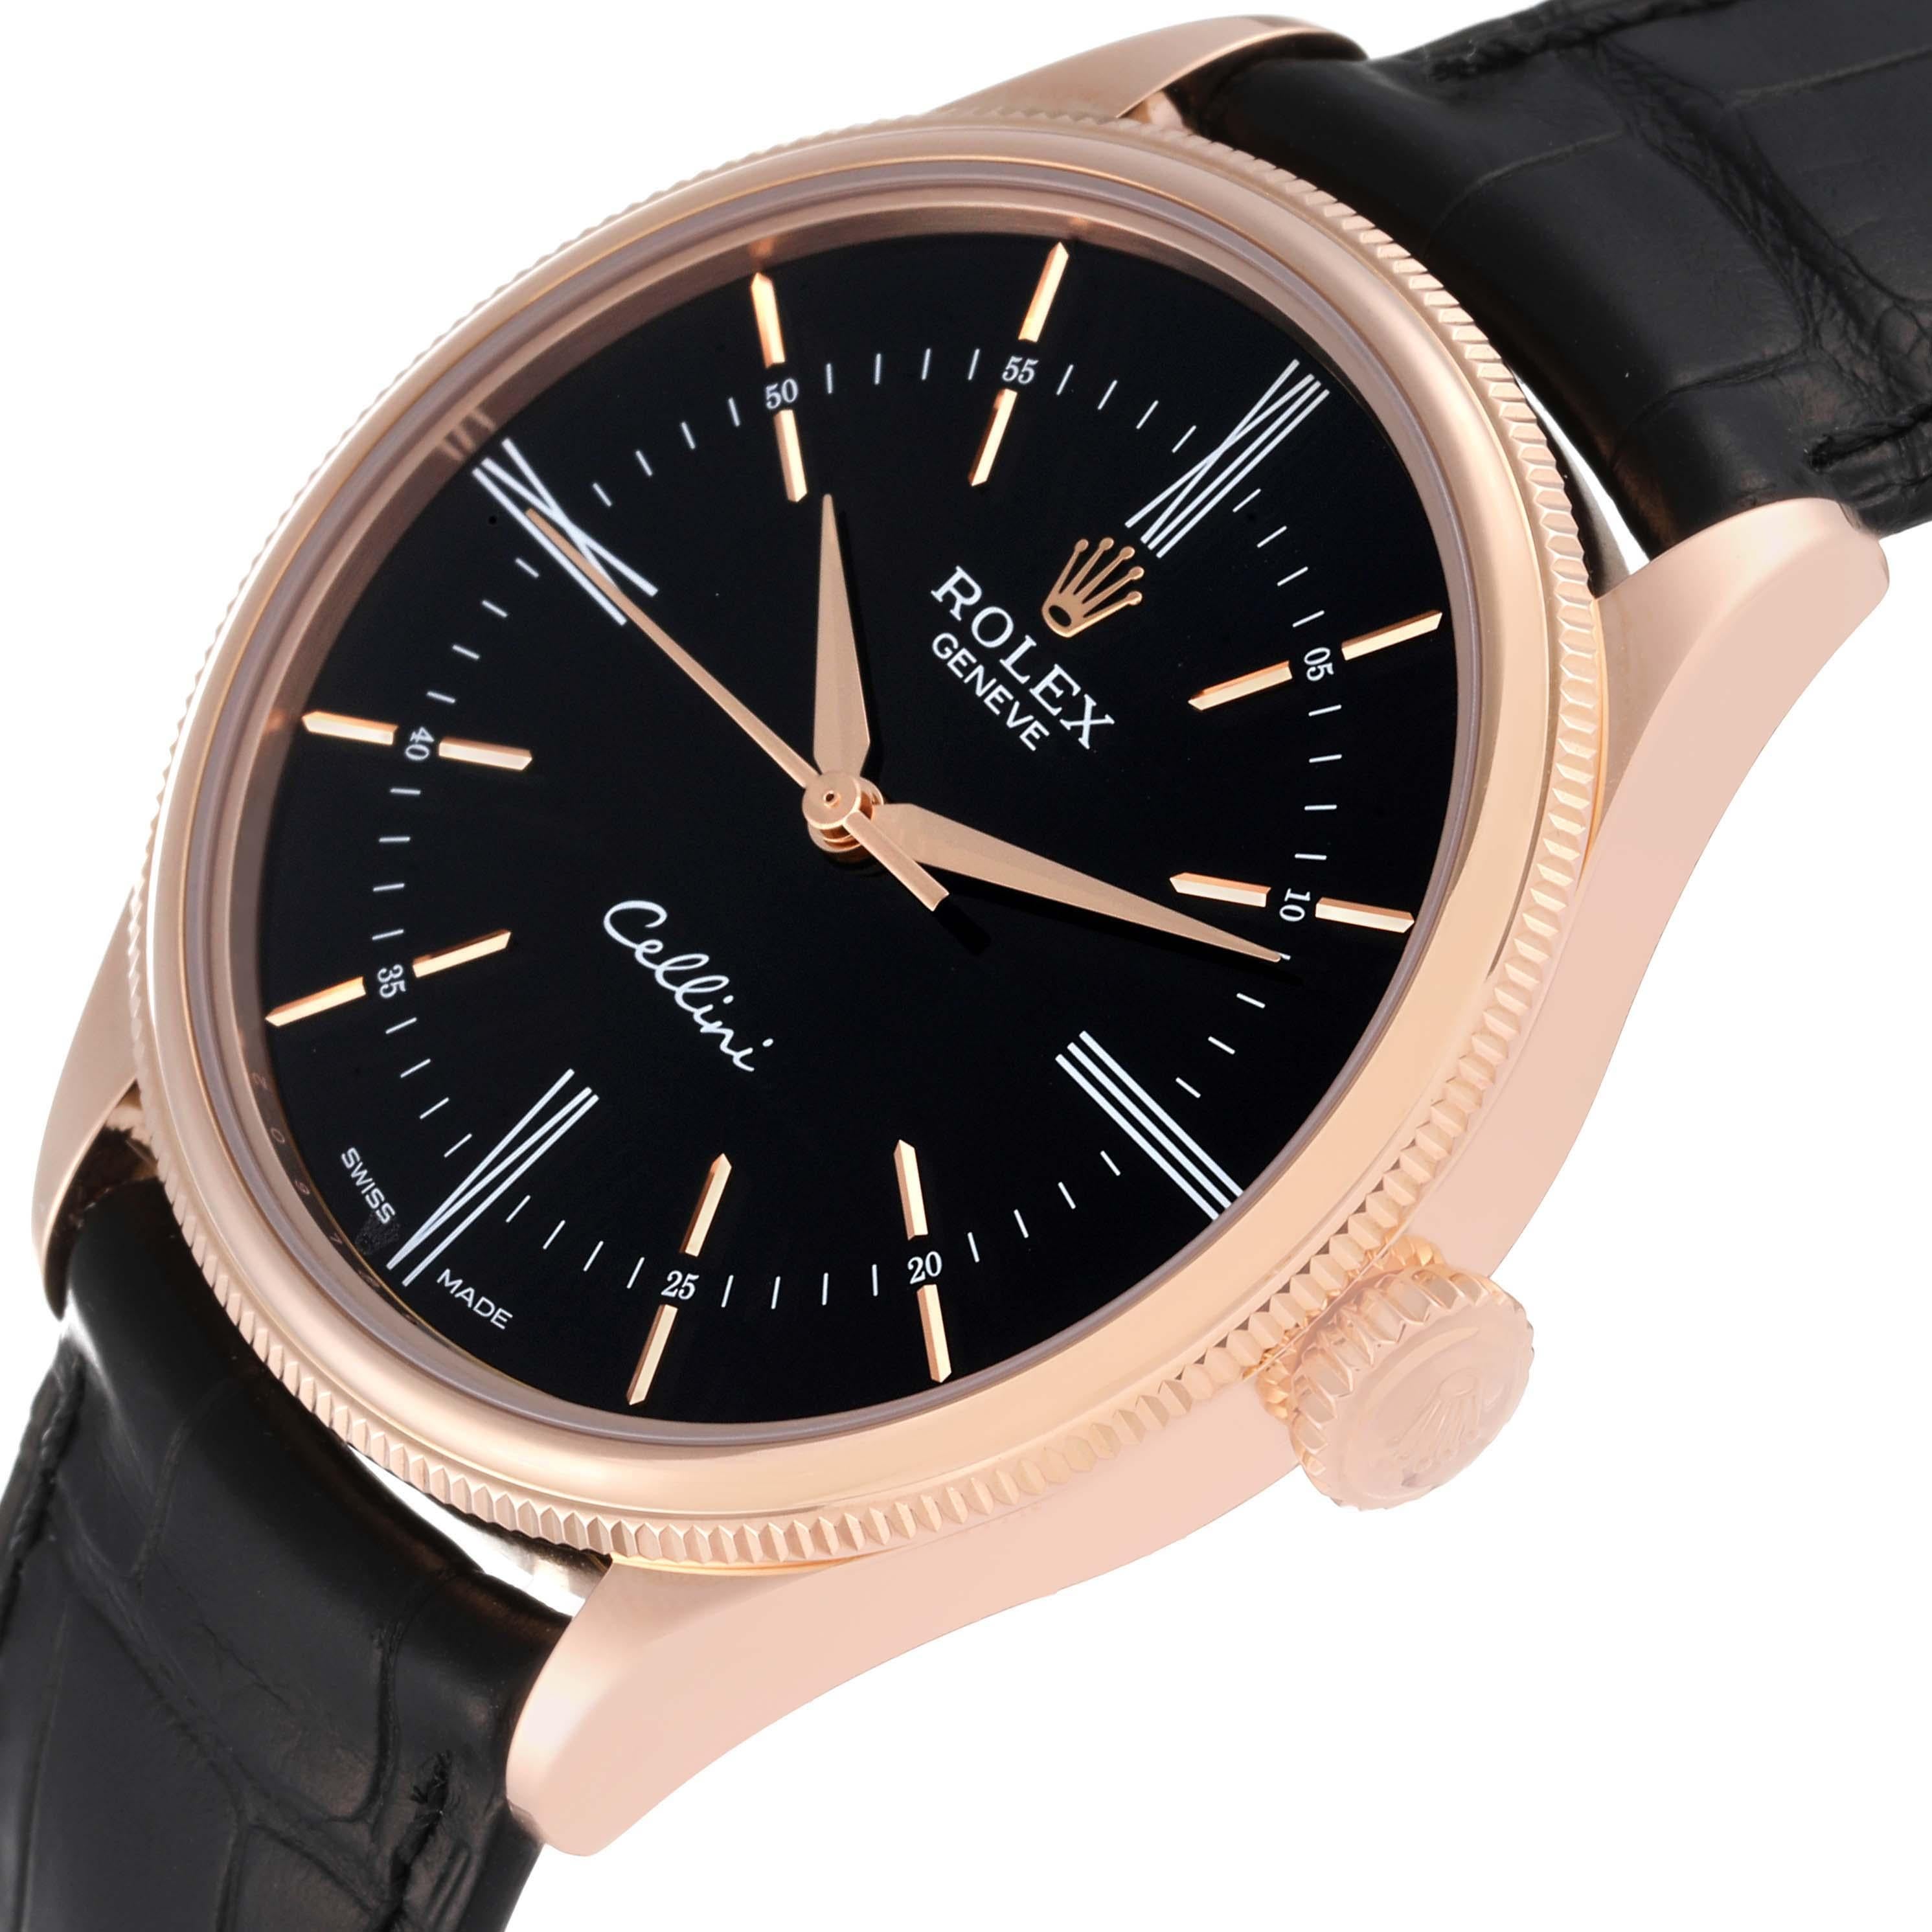 Rolex Cellini Time Rose Gold Black Dial Mens Watch 50505 Box Card 1